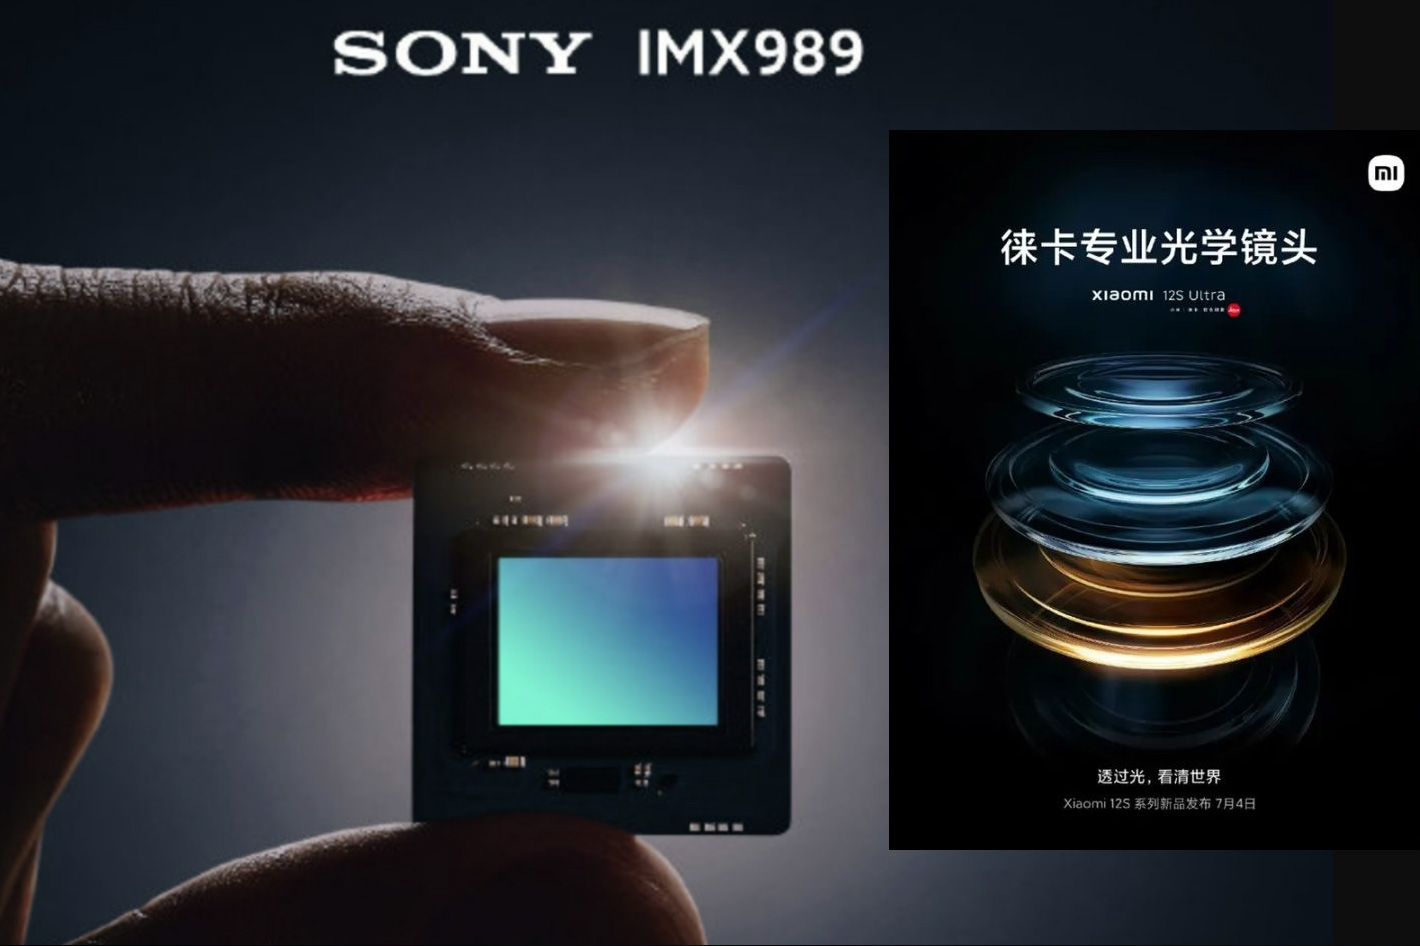 Sony IMX989 a 1-inch type image camera sensor for smartphones